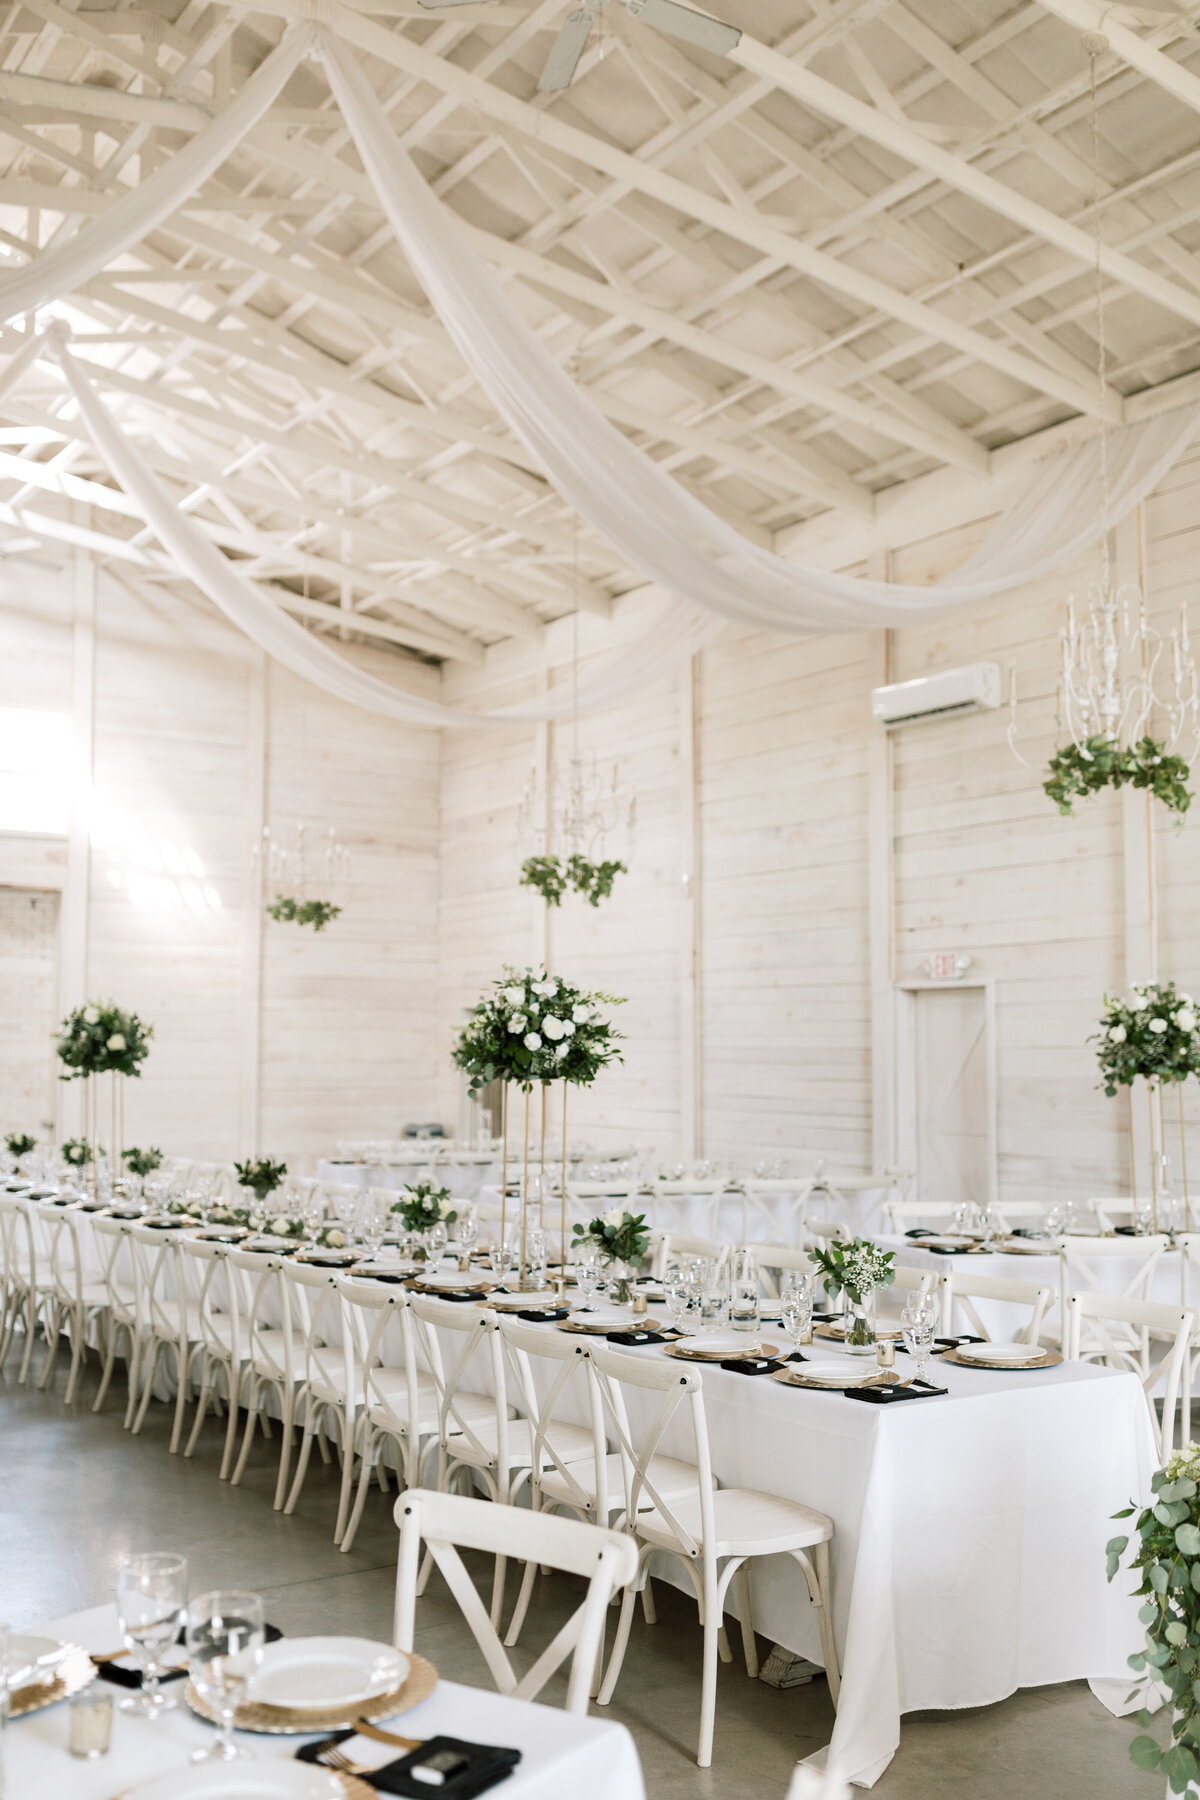 Inspiration for White Dove Barn reception design with classic cream and greenery